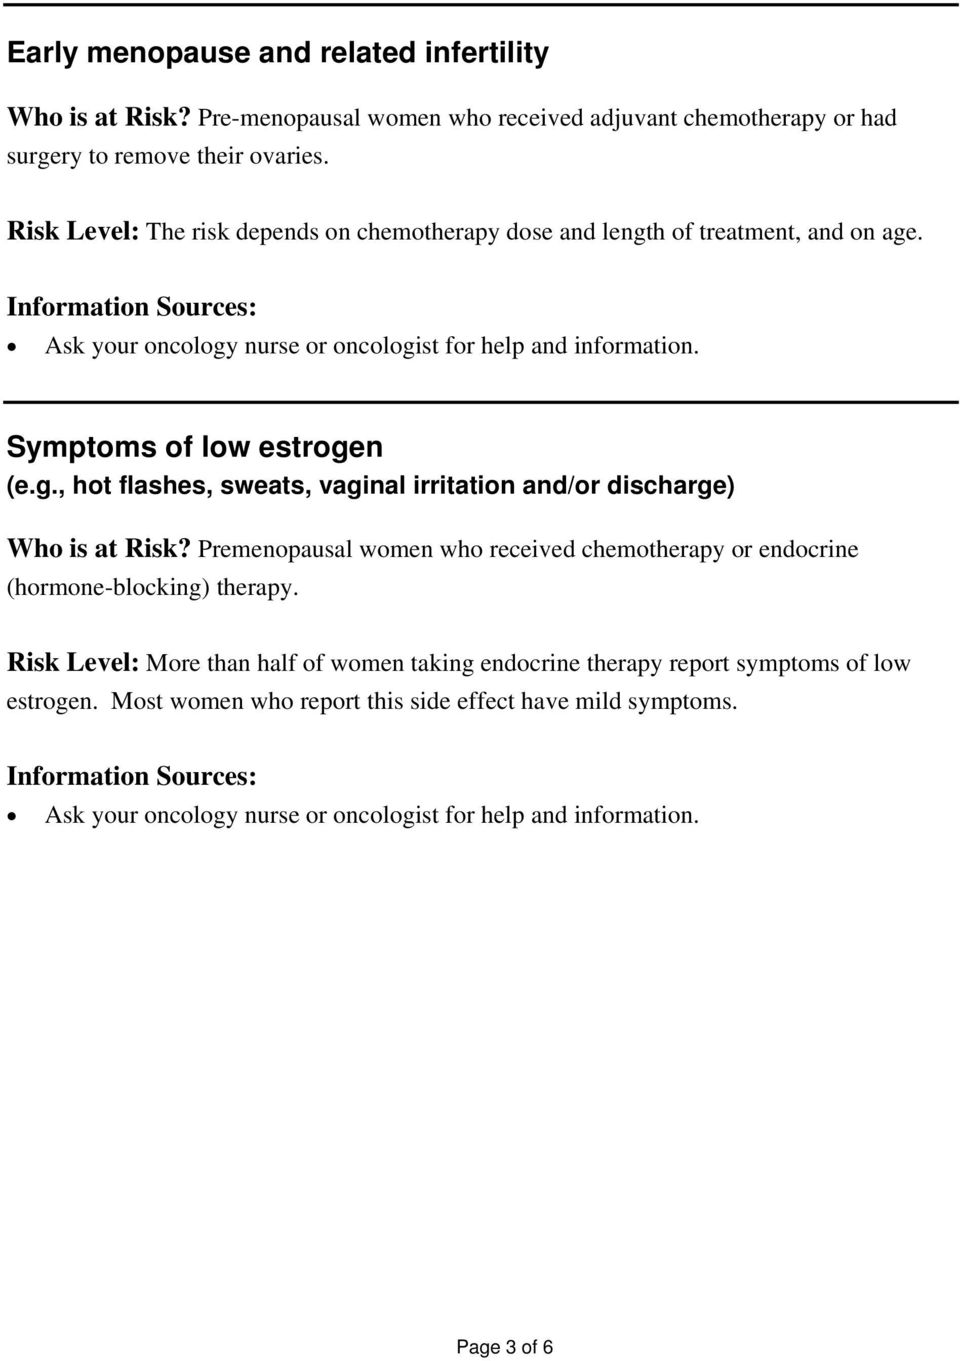 Premenopausal women who received chemotherapy or endocrine (hormone-blocking) therapy. Risk Level: More than half of women taking endocrine therapy report symptoms of low estrogen.